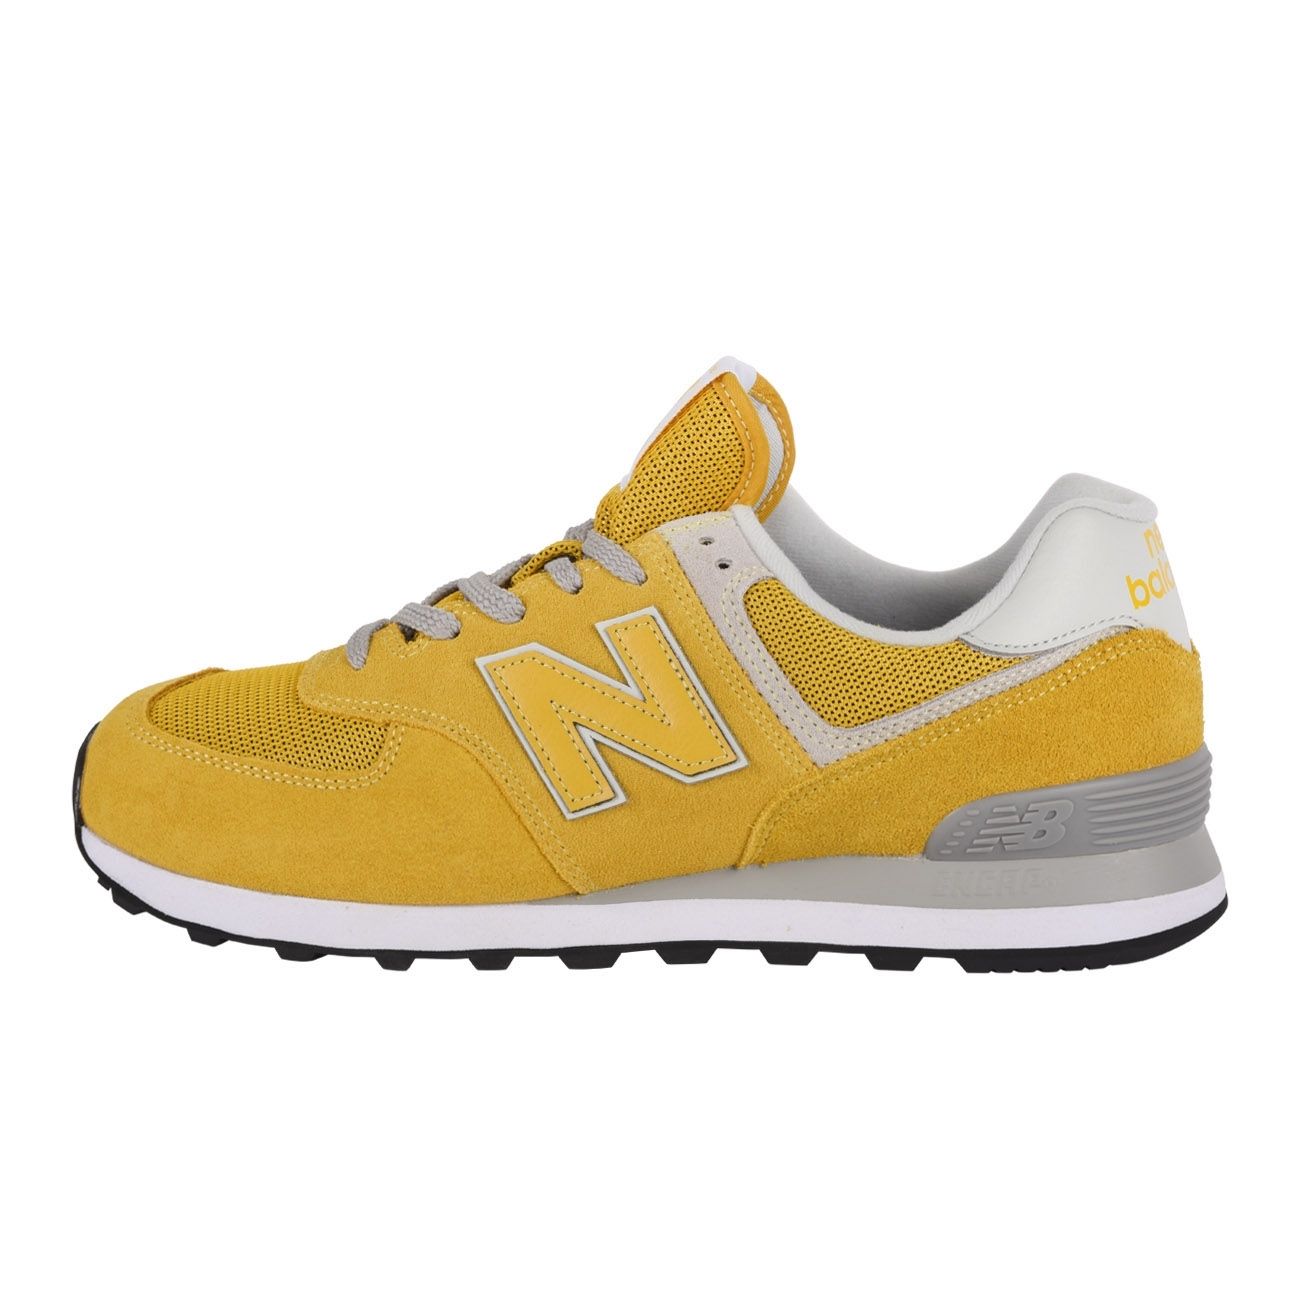 new balance 574 yellow suede/mesh trainers